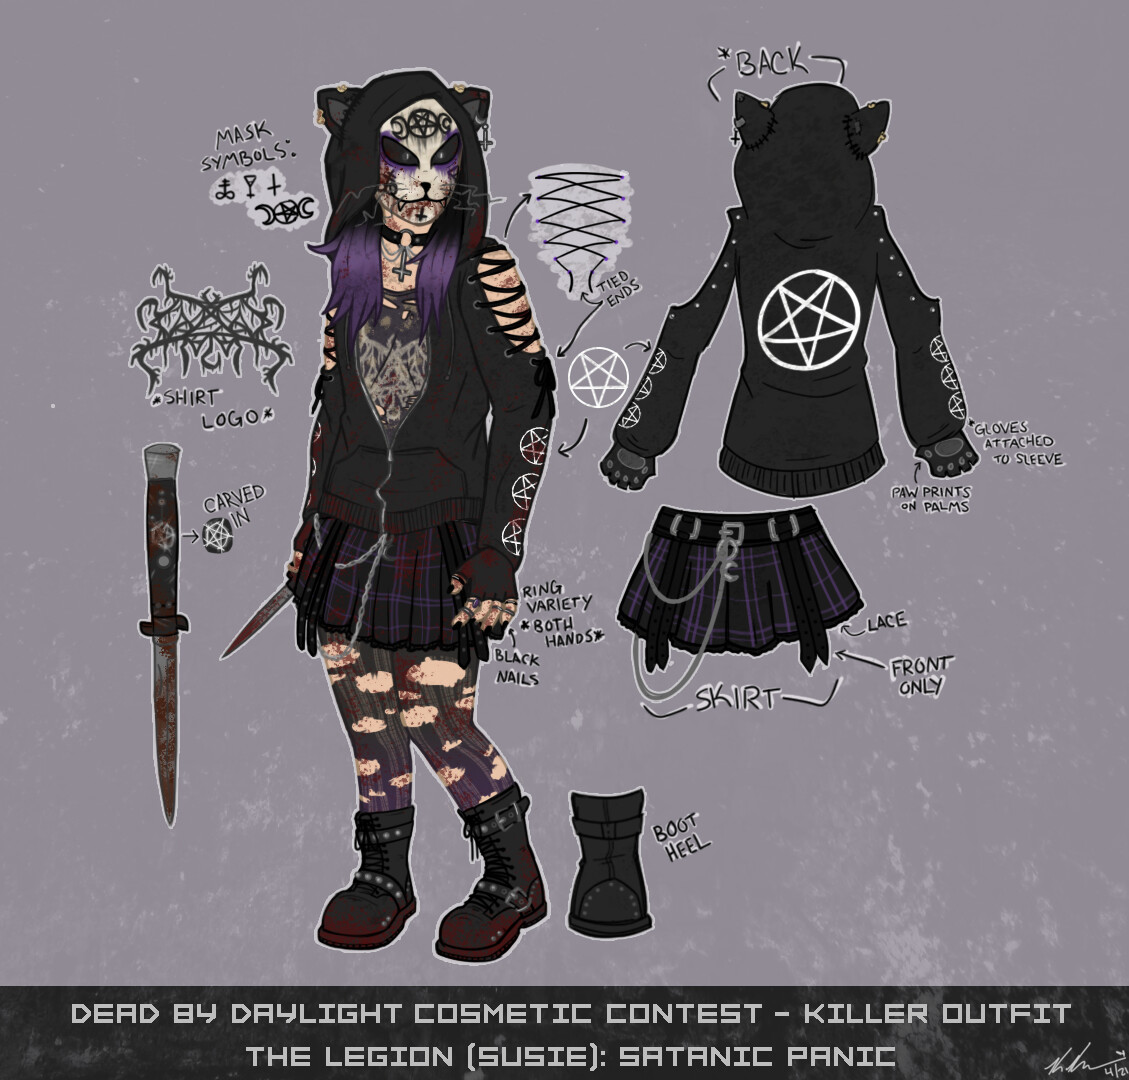 Kate Kruse - Dead by Daylight Cosmetic Contest Entry - The Legion (Susie) 